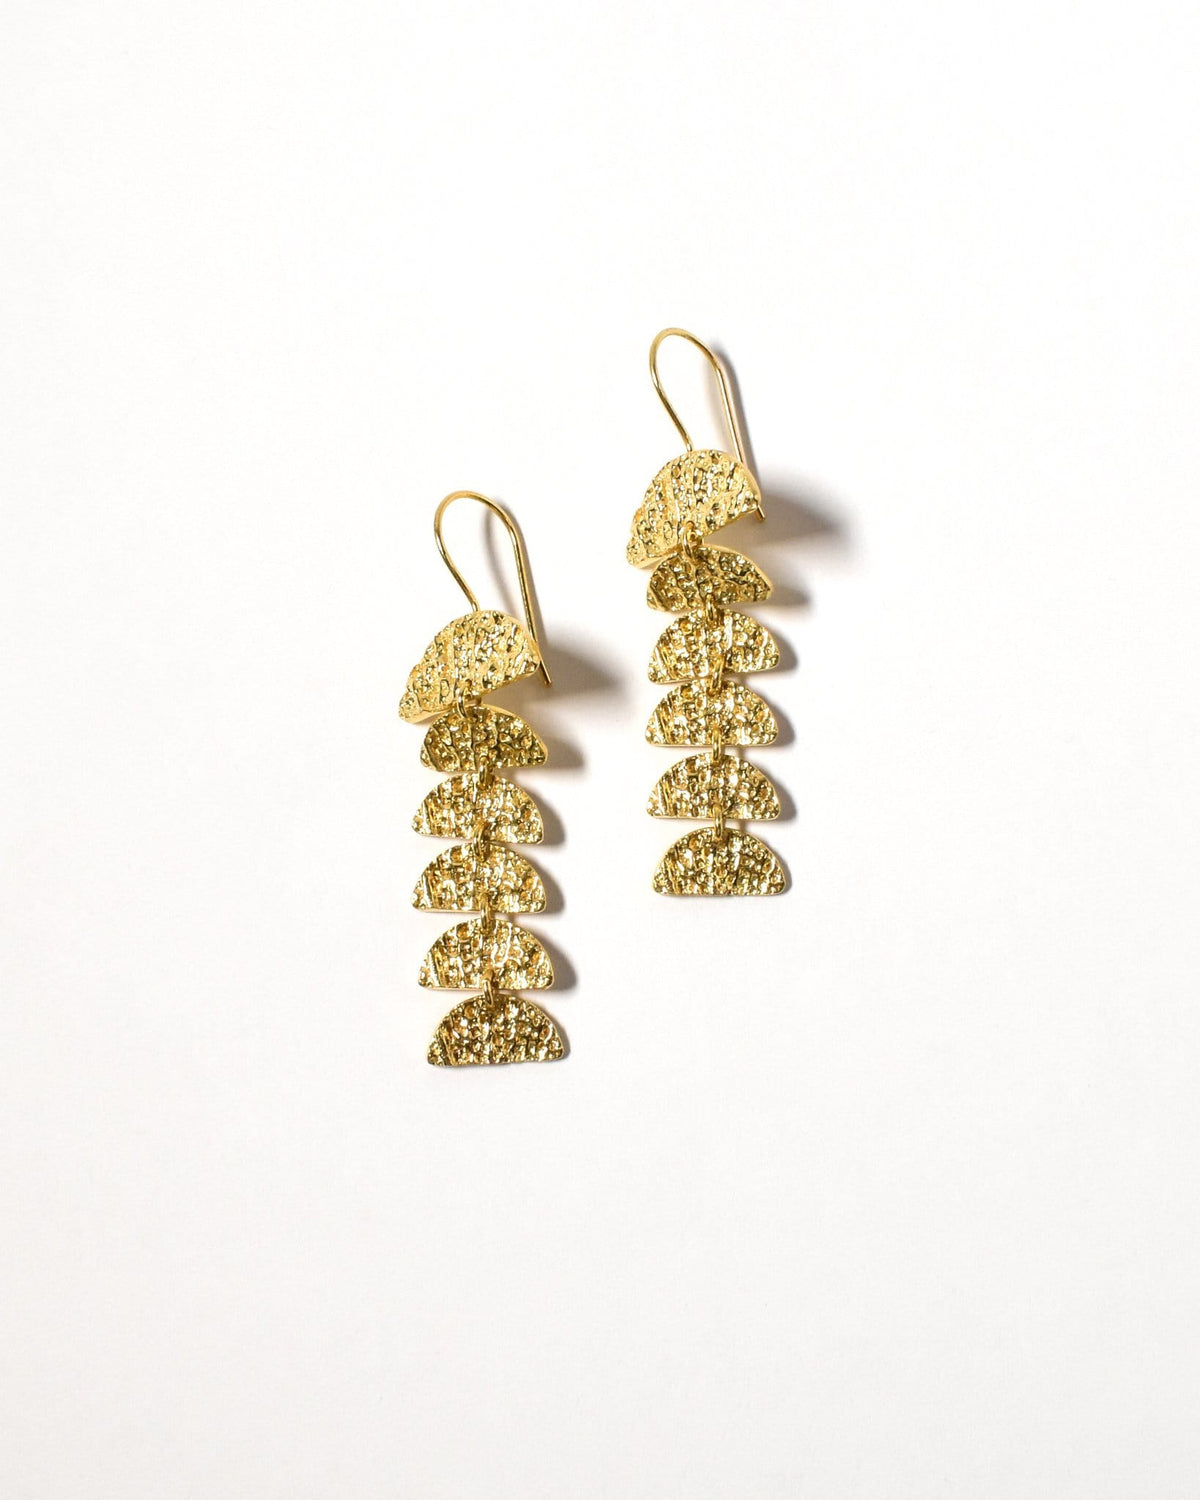 Elouera Earrings, Yellow Gold Plated